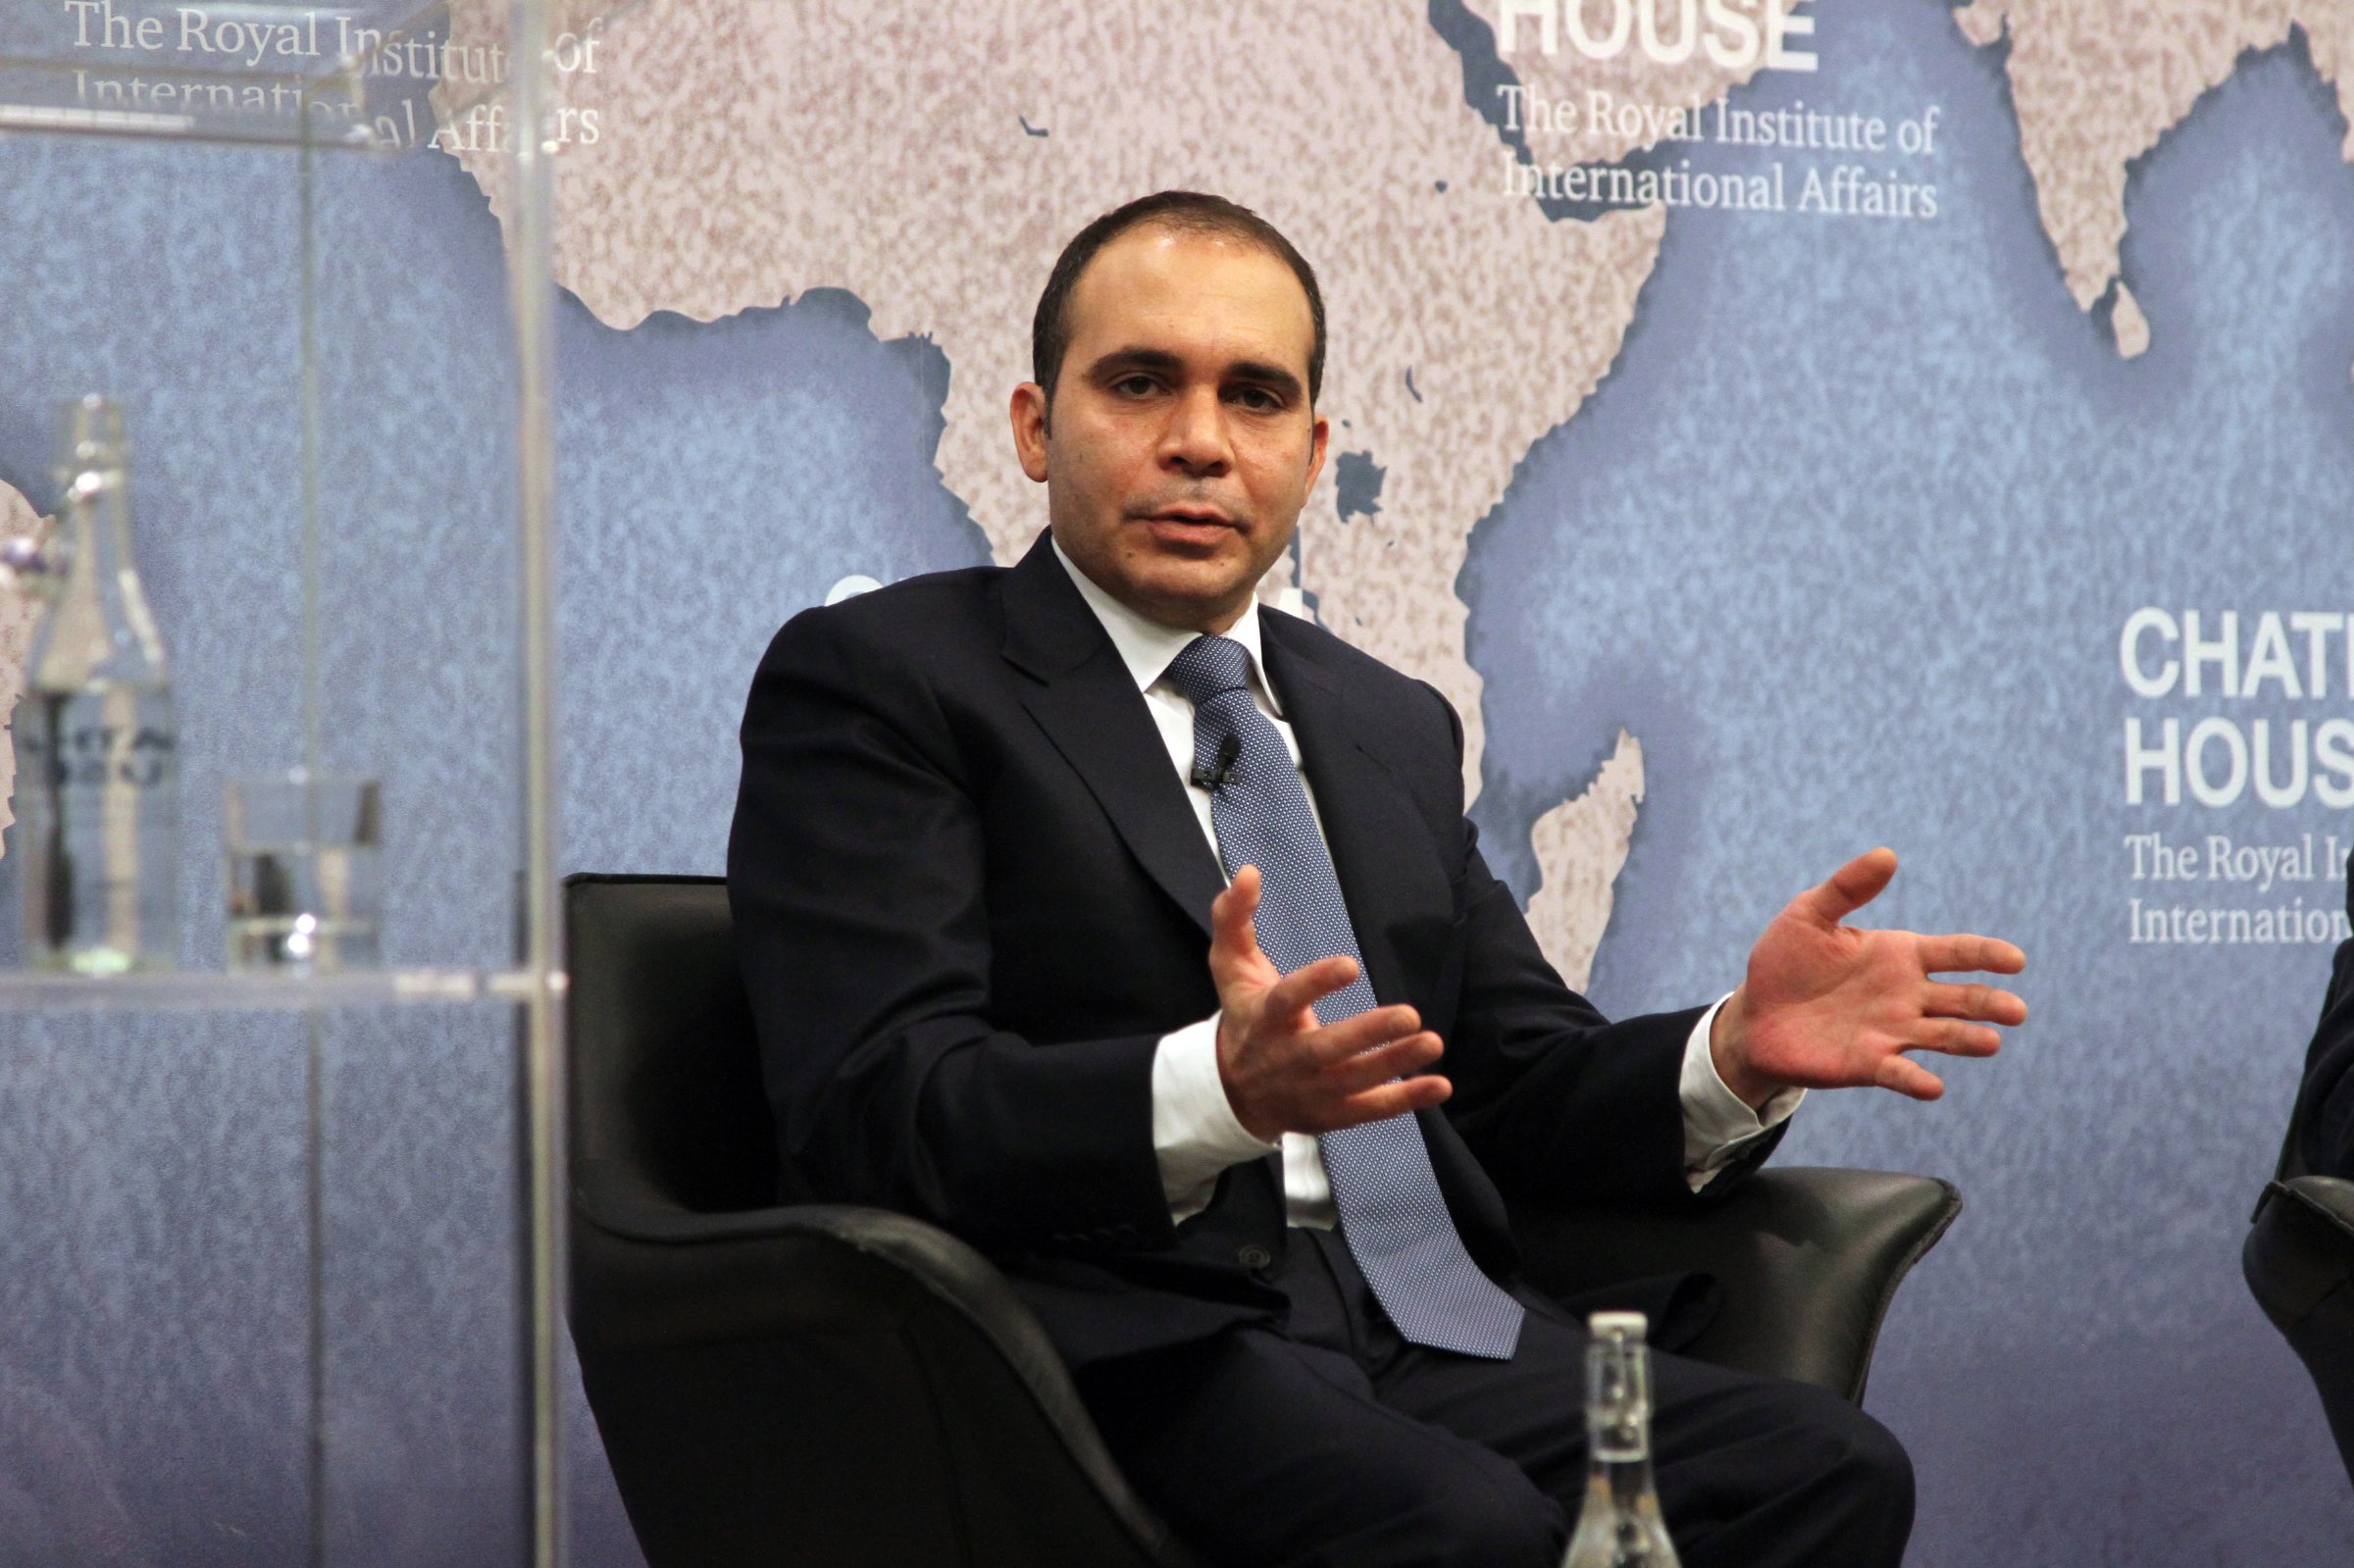 Prince Ali Bin Al Hussein of Jordan vows to root out corruption at footballs governing body, in a speech at Chatham House as part of his bid to become president of FIFA.